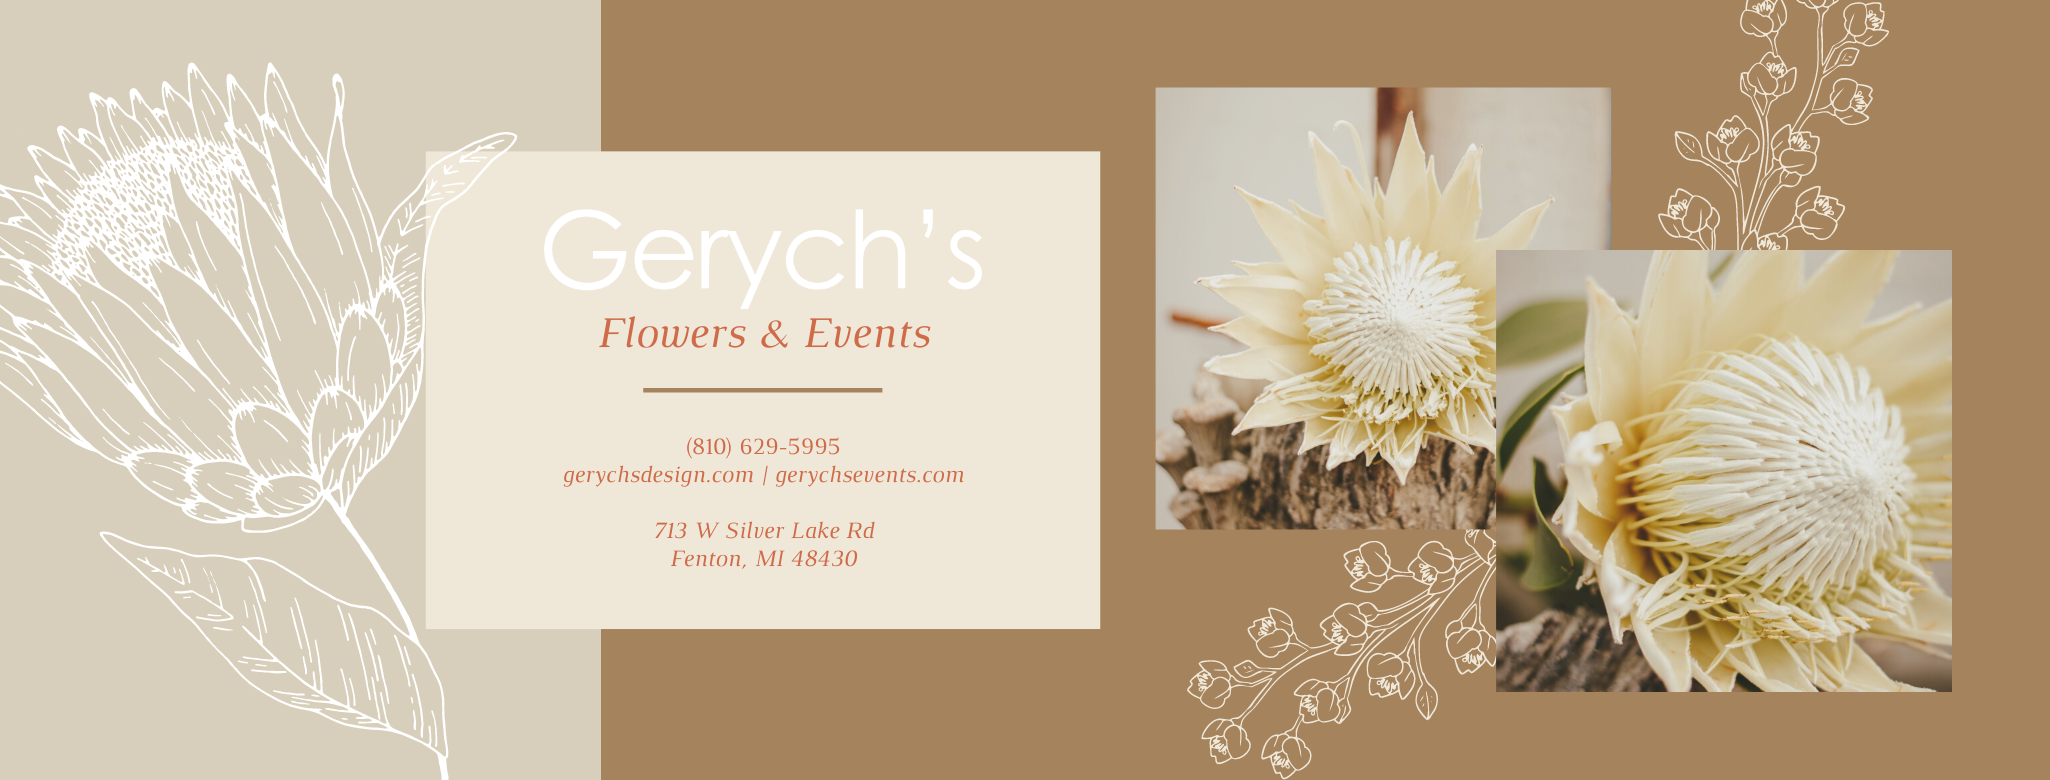 Gerych’s Greenhouse, Flowers & Events